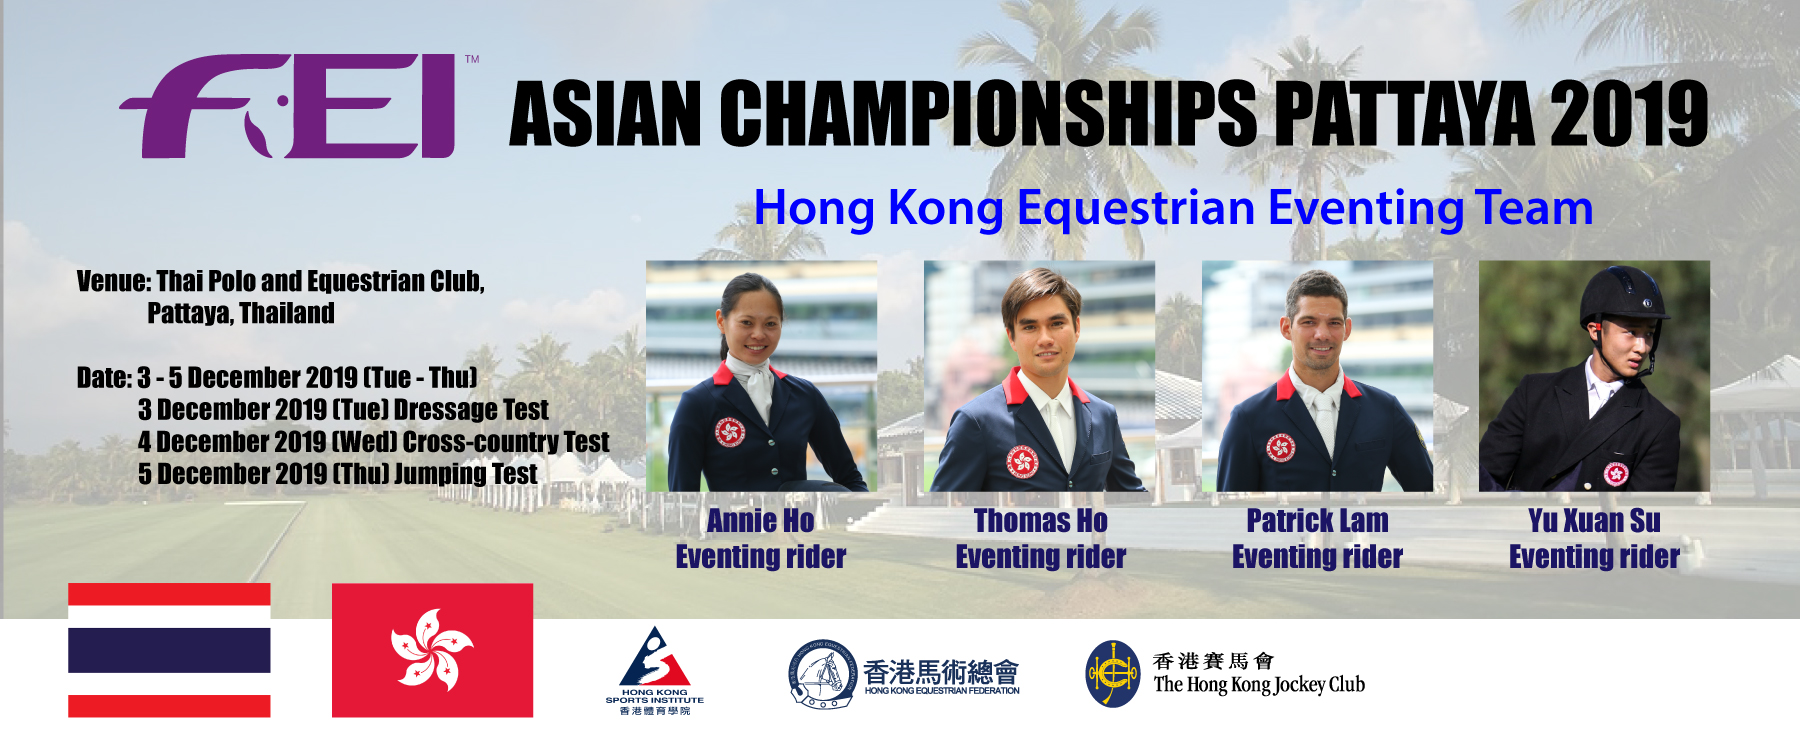 Selected-Eventing-riders-for-Asian-Championship1